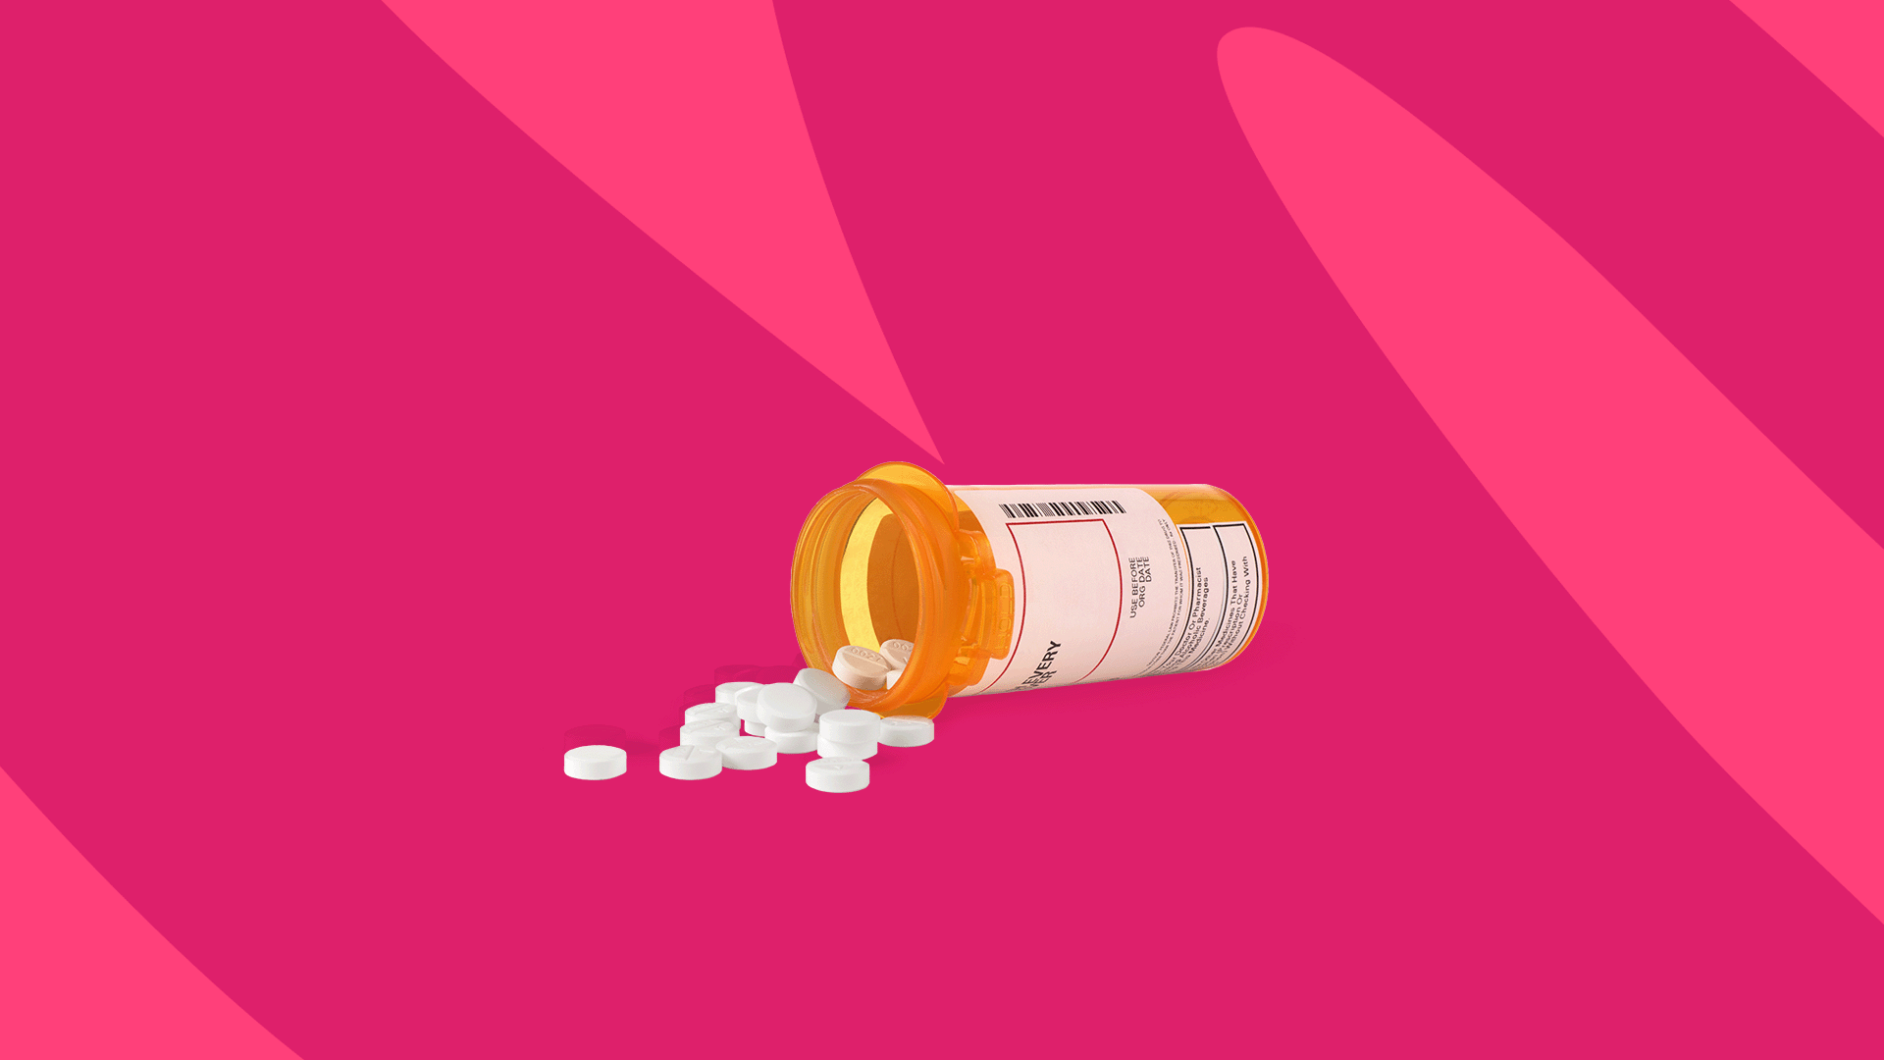 Rx pill bottle: Pioglitazone side effects and how to avoid them